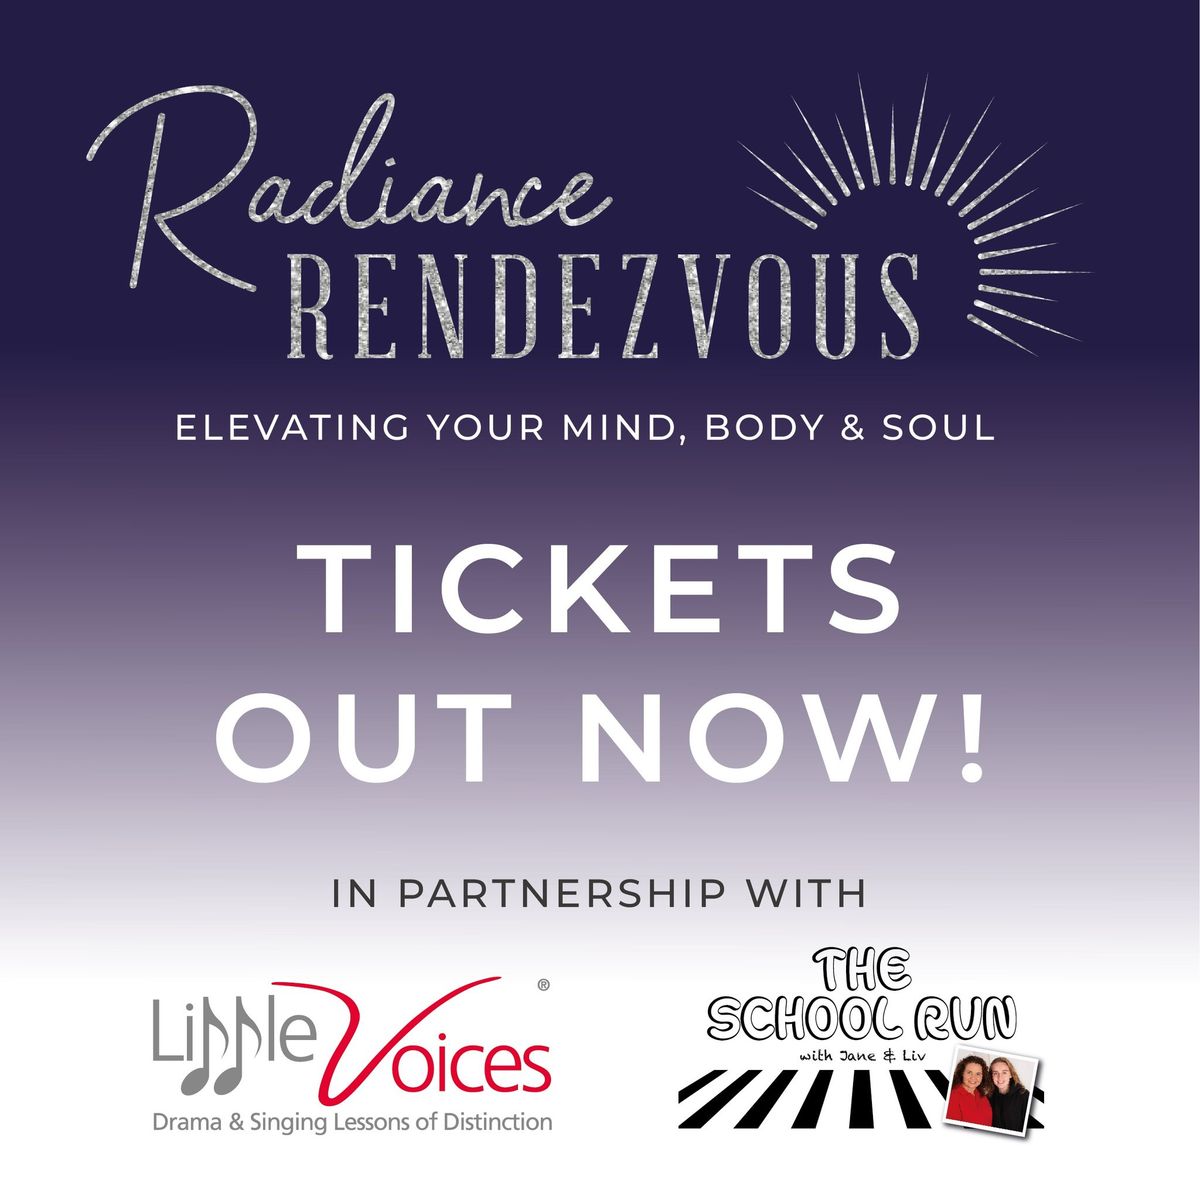 Radiance Rendezvous with The School Run podcast \ud83c\udf99\ufe0f